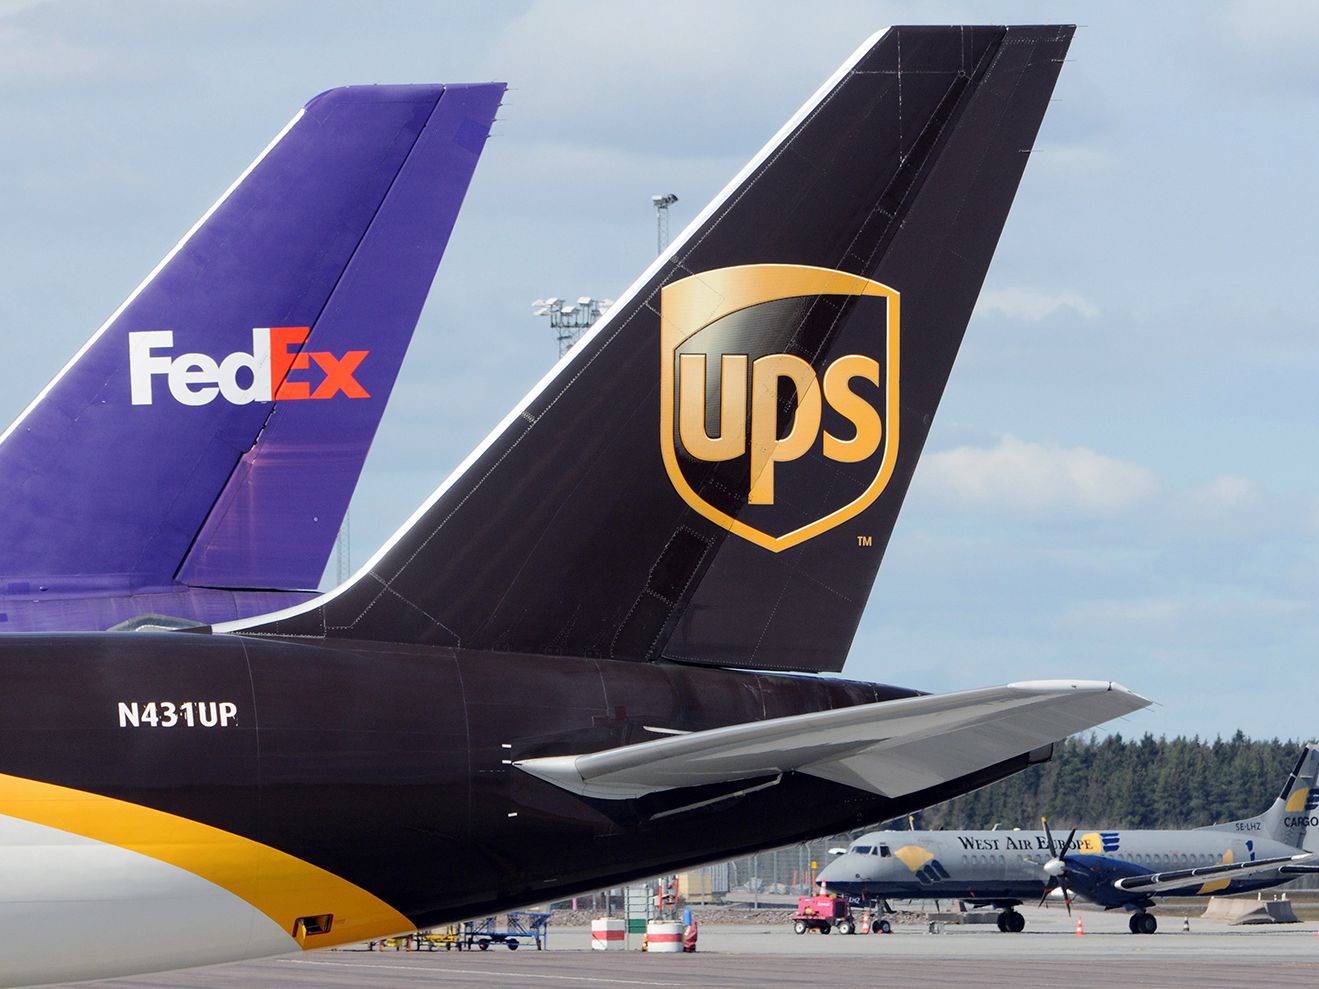 Comparison between FedEx vs UPS: Which Is Better?